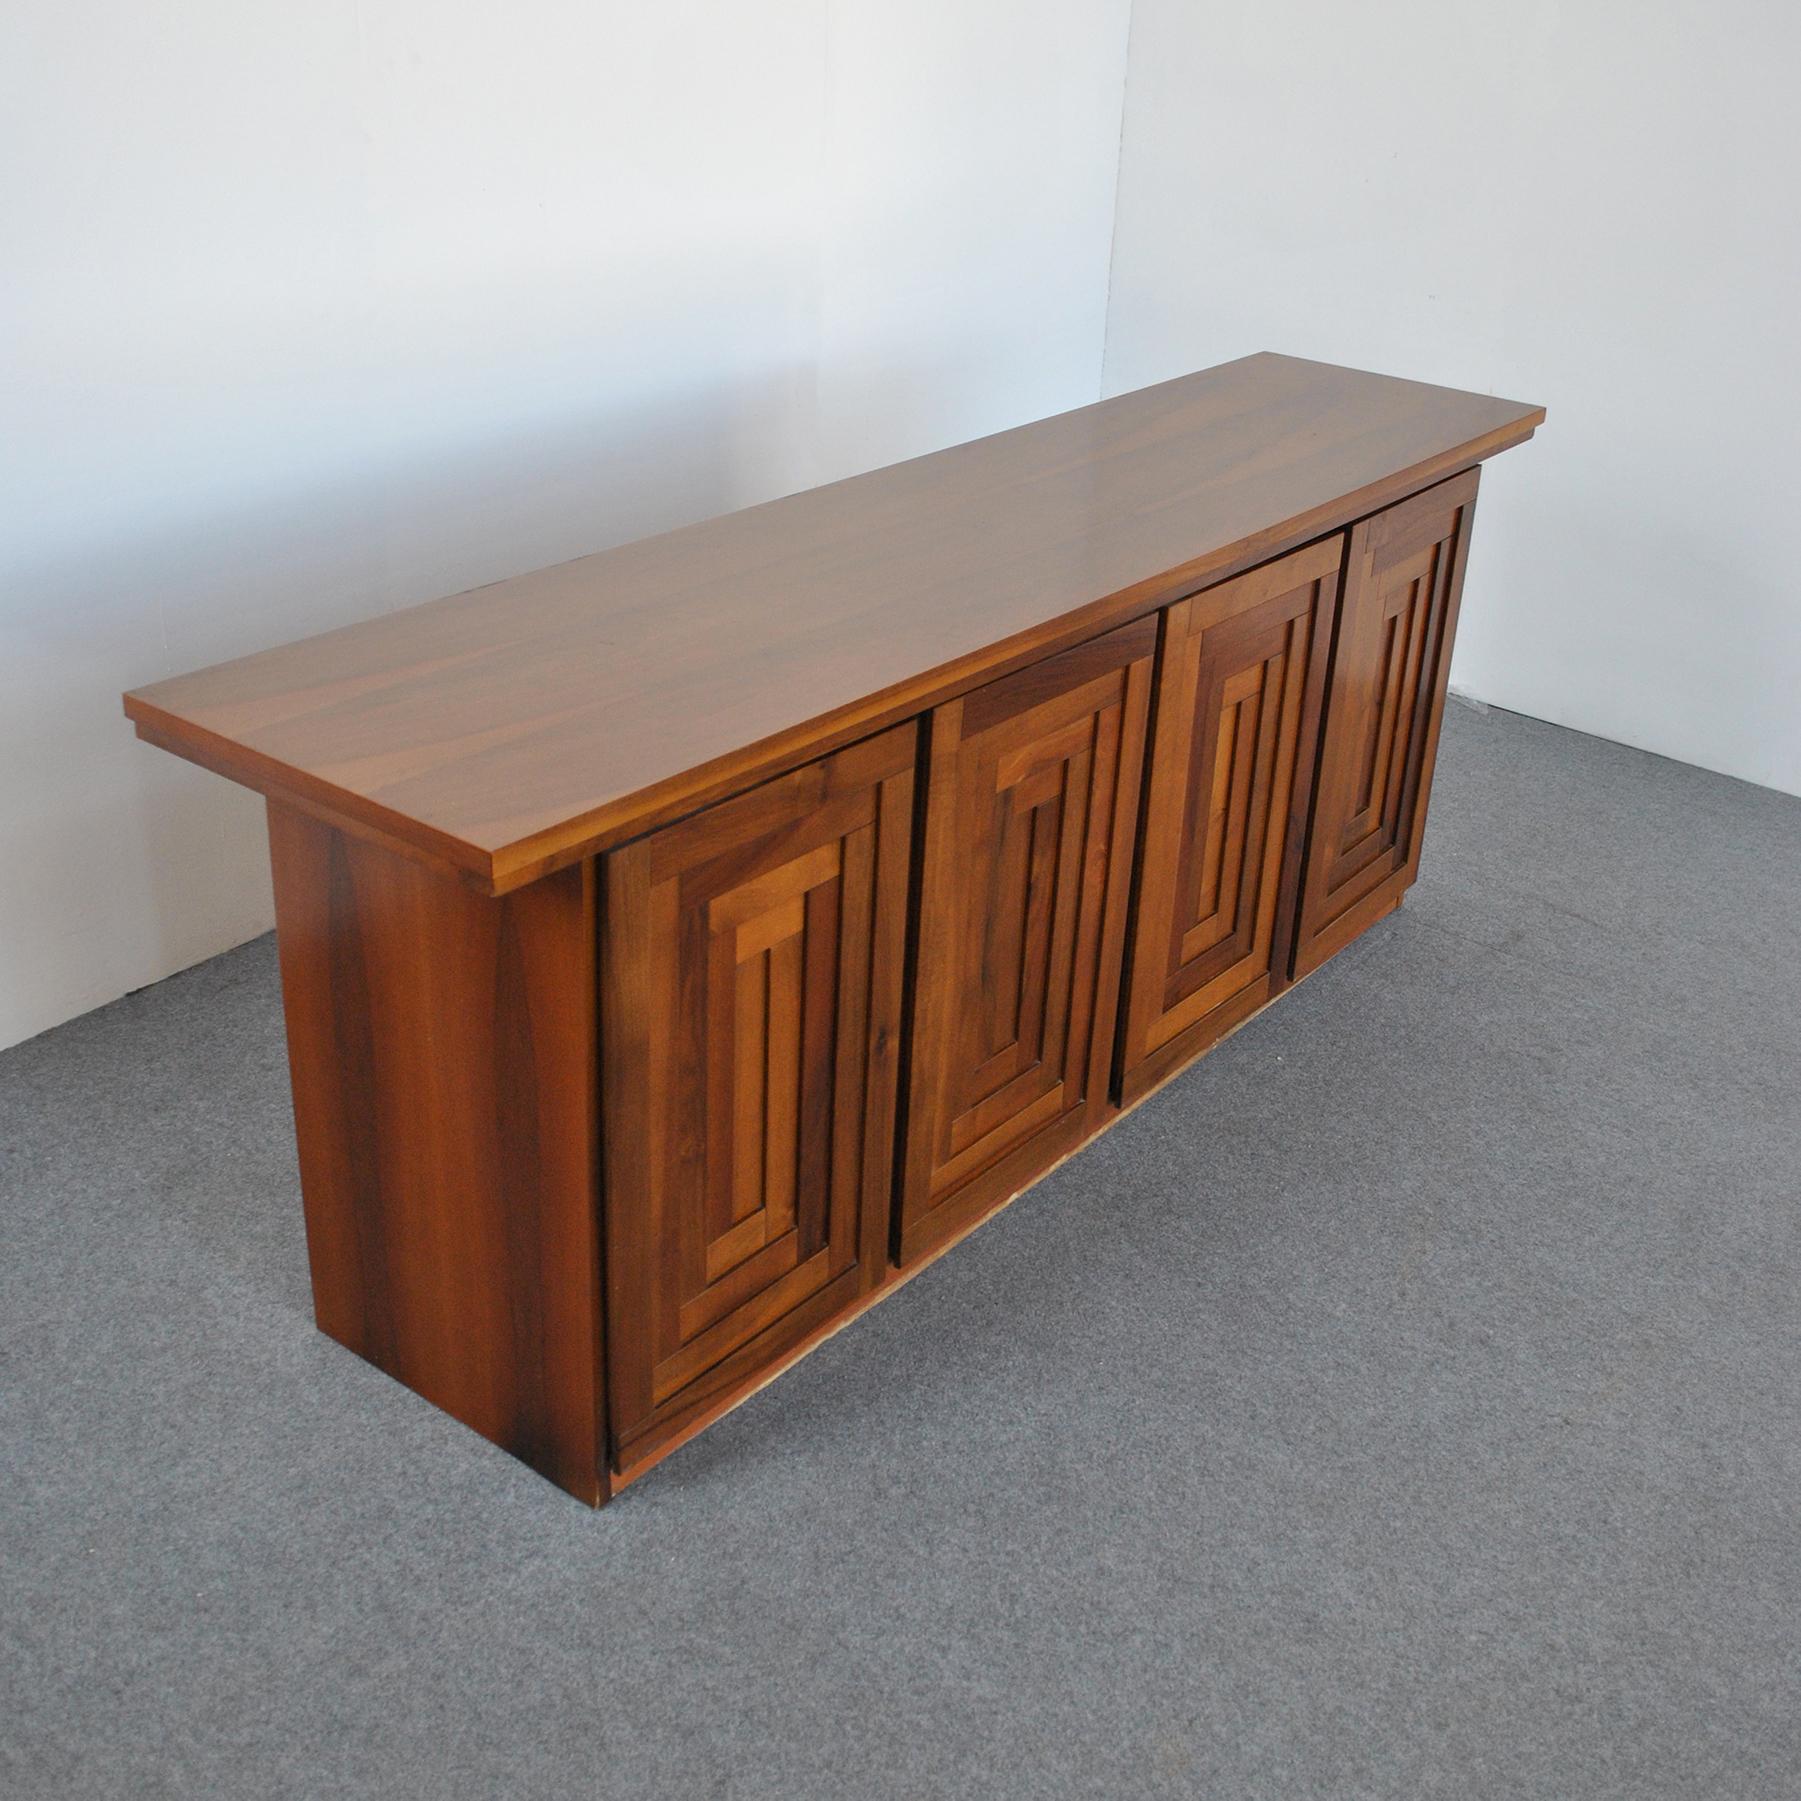 Wood Afra & Tobia Scarpa in the Manner Sideboard 70's